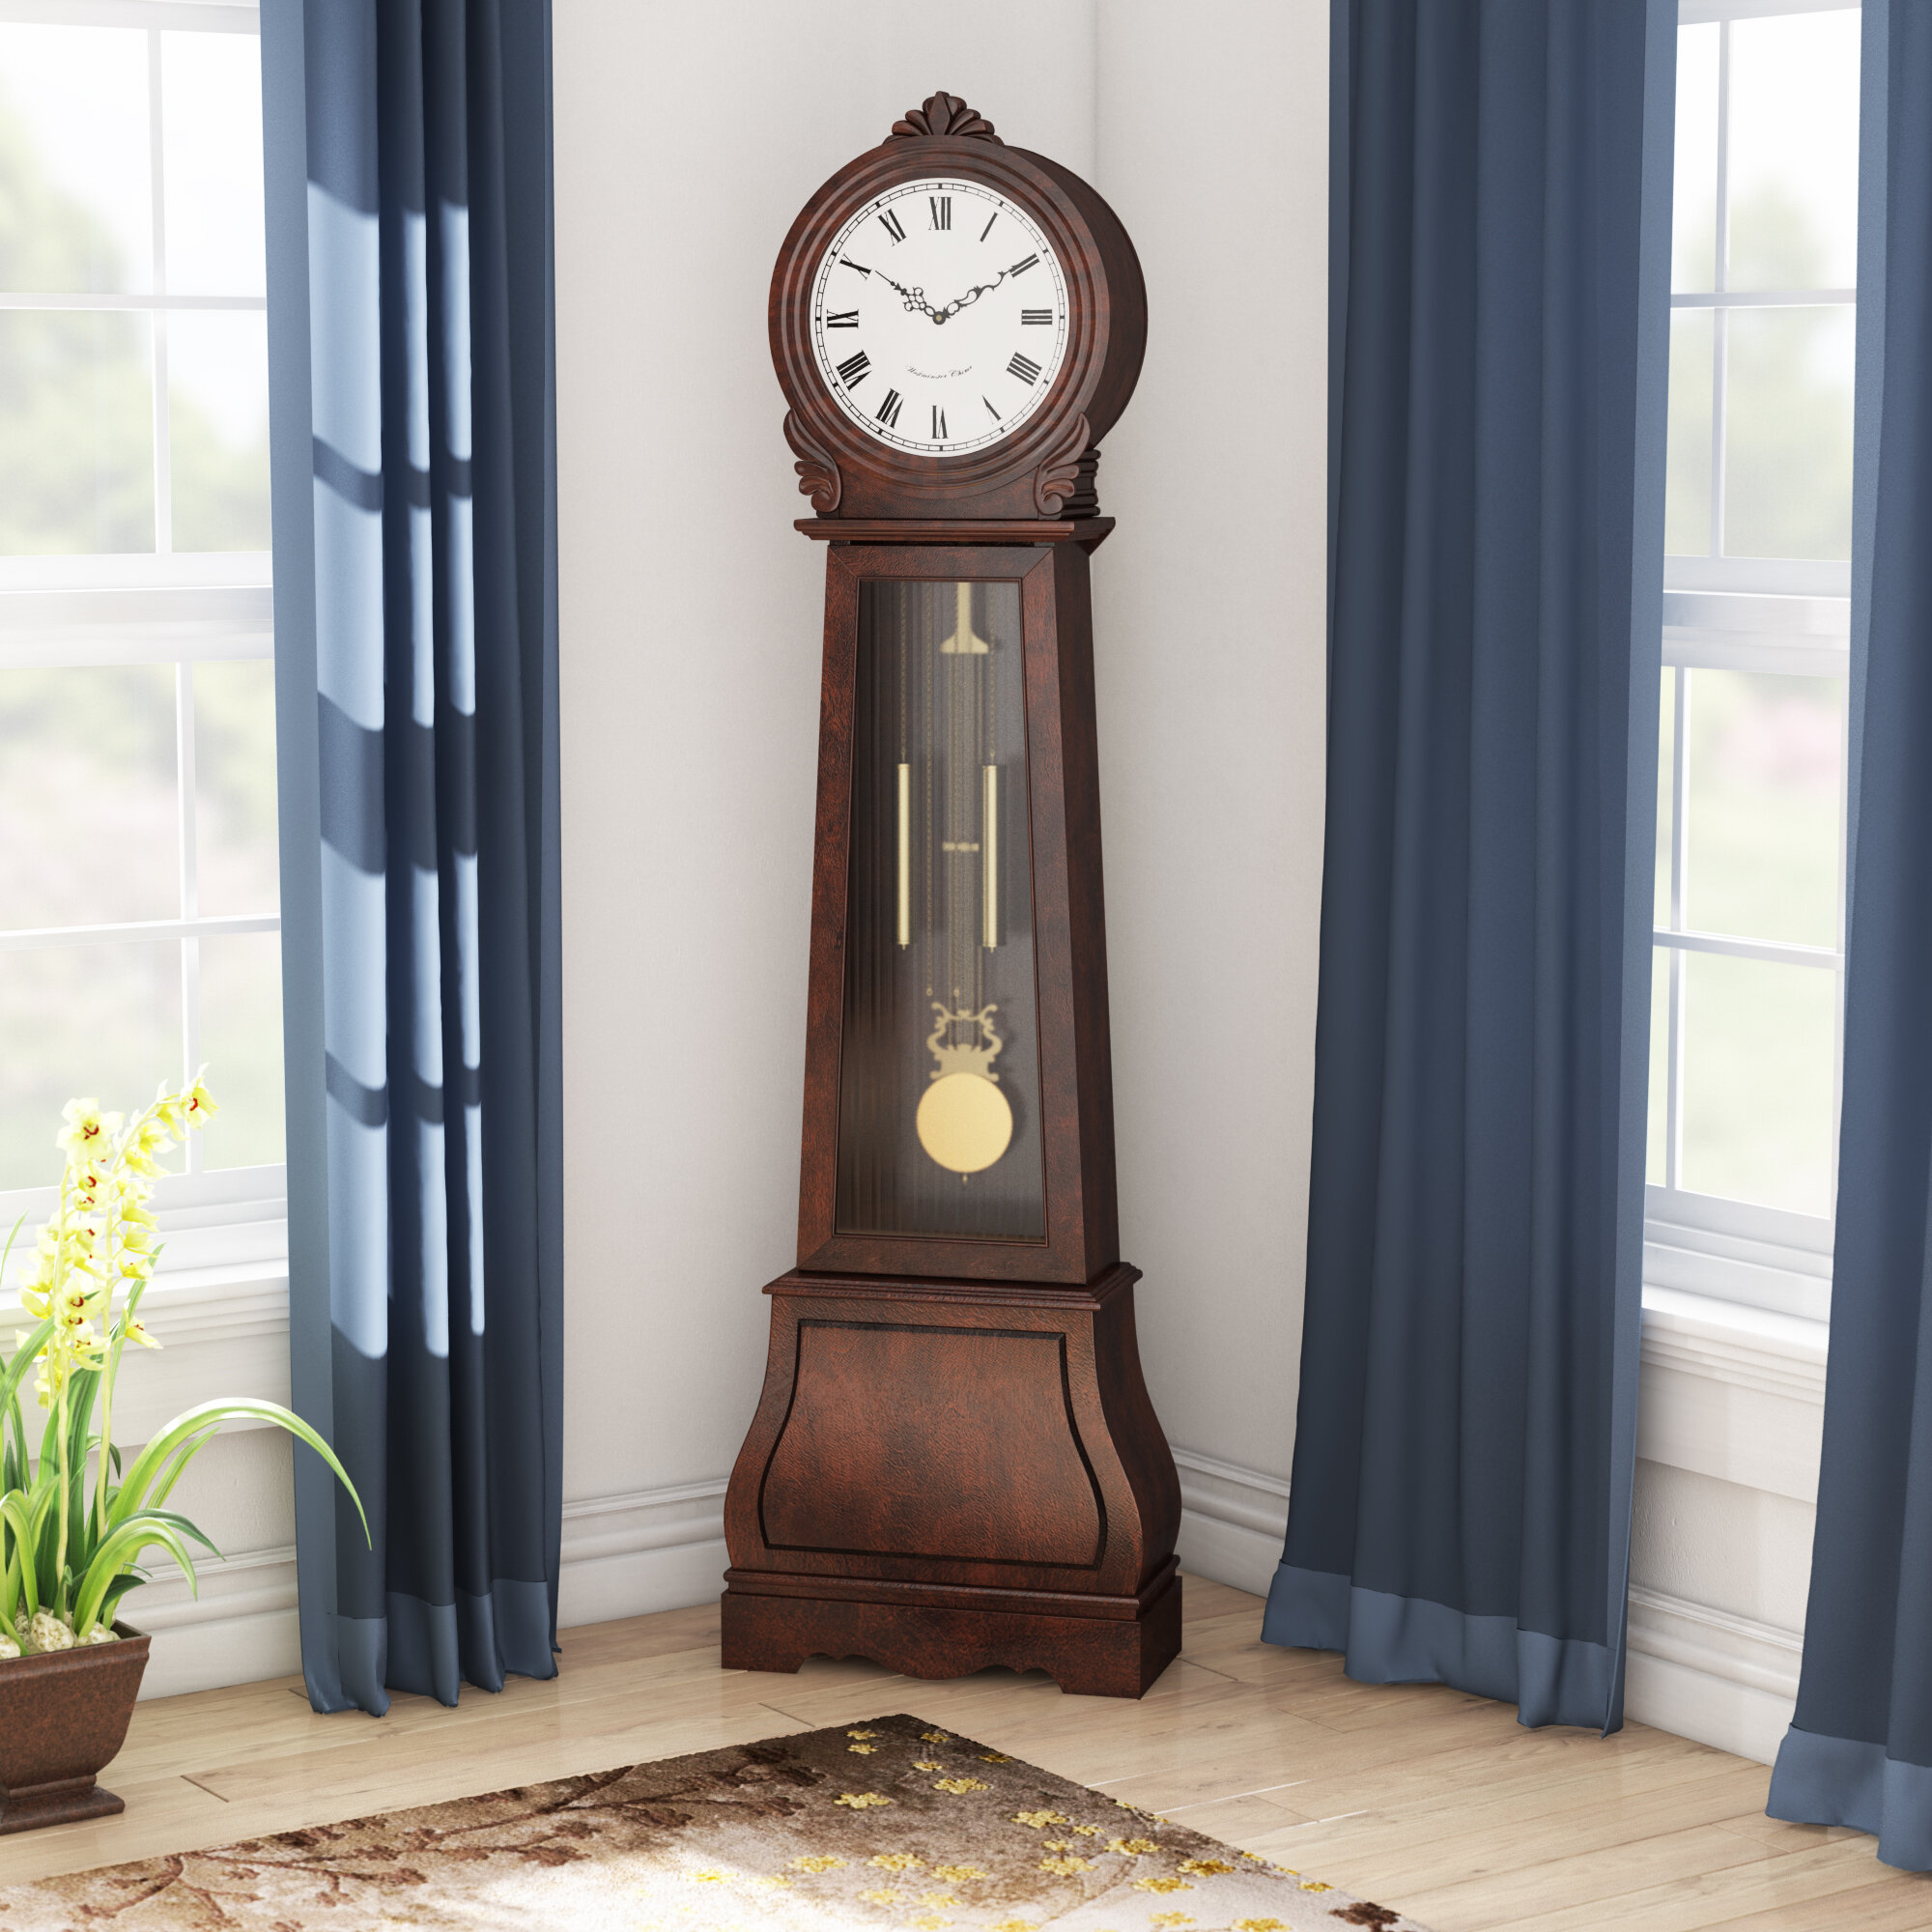 Finely Cut Original Style Tall Case Clock Hands for 9" or Smaller Dials 